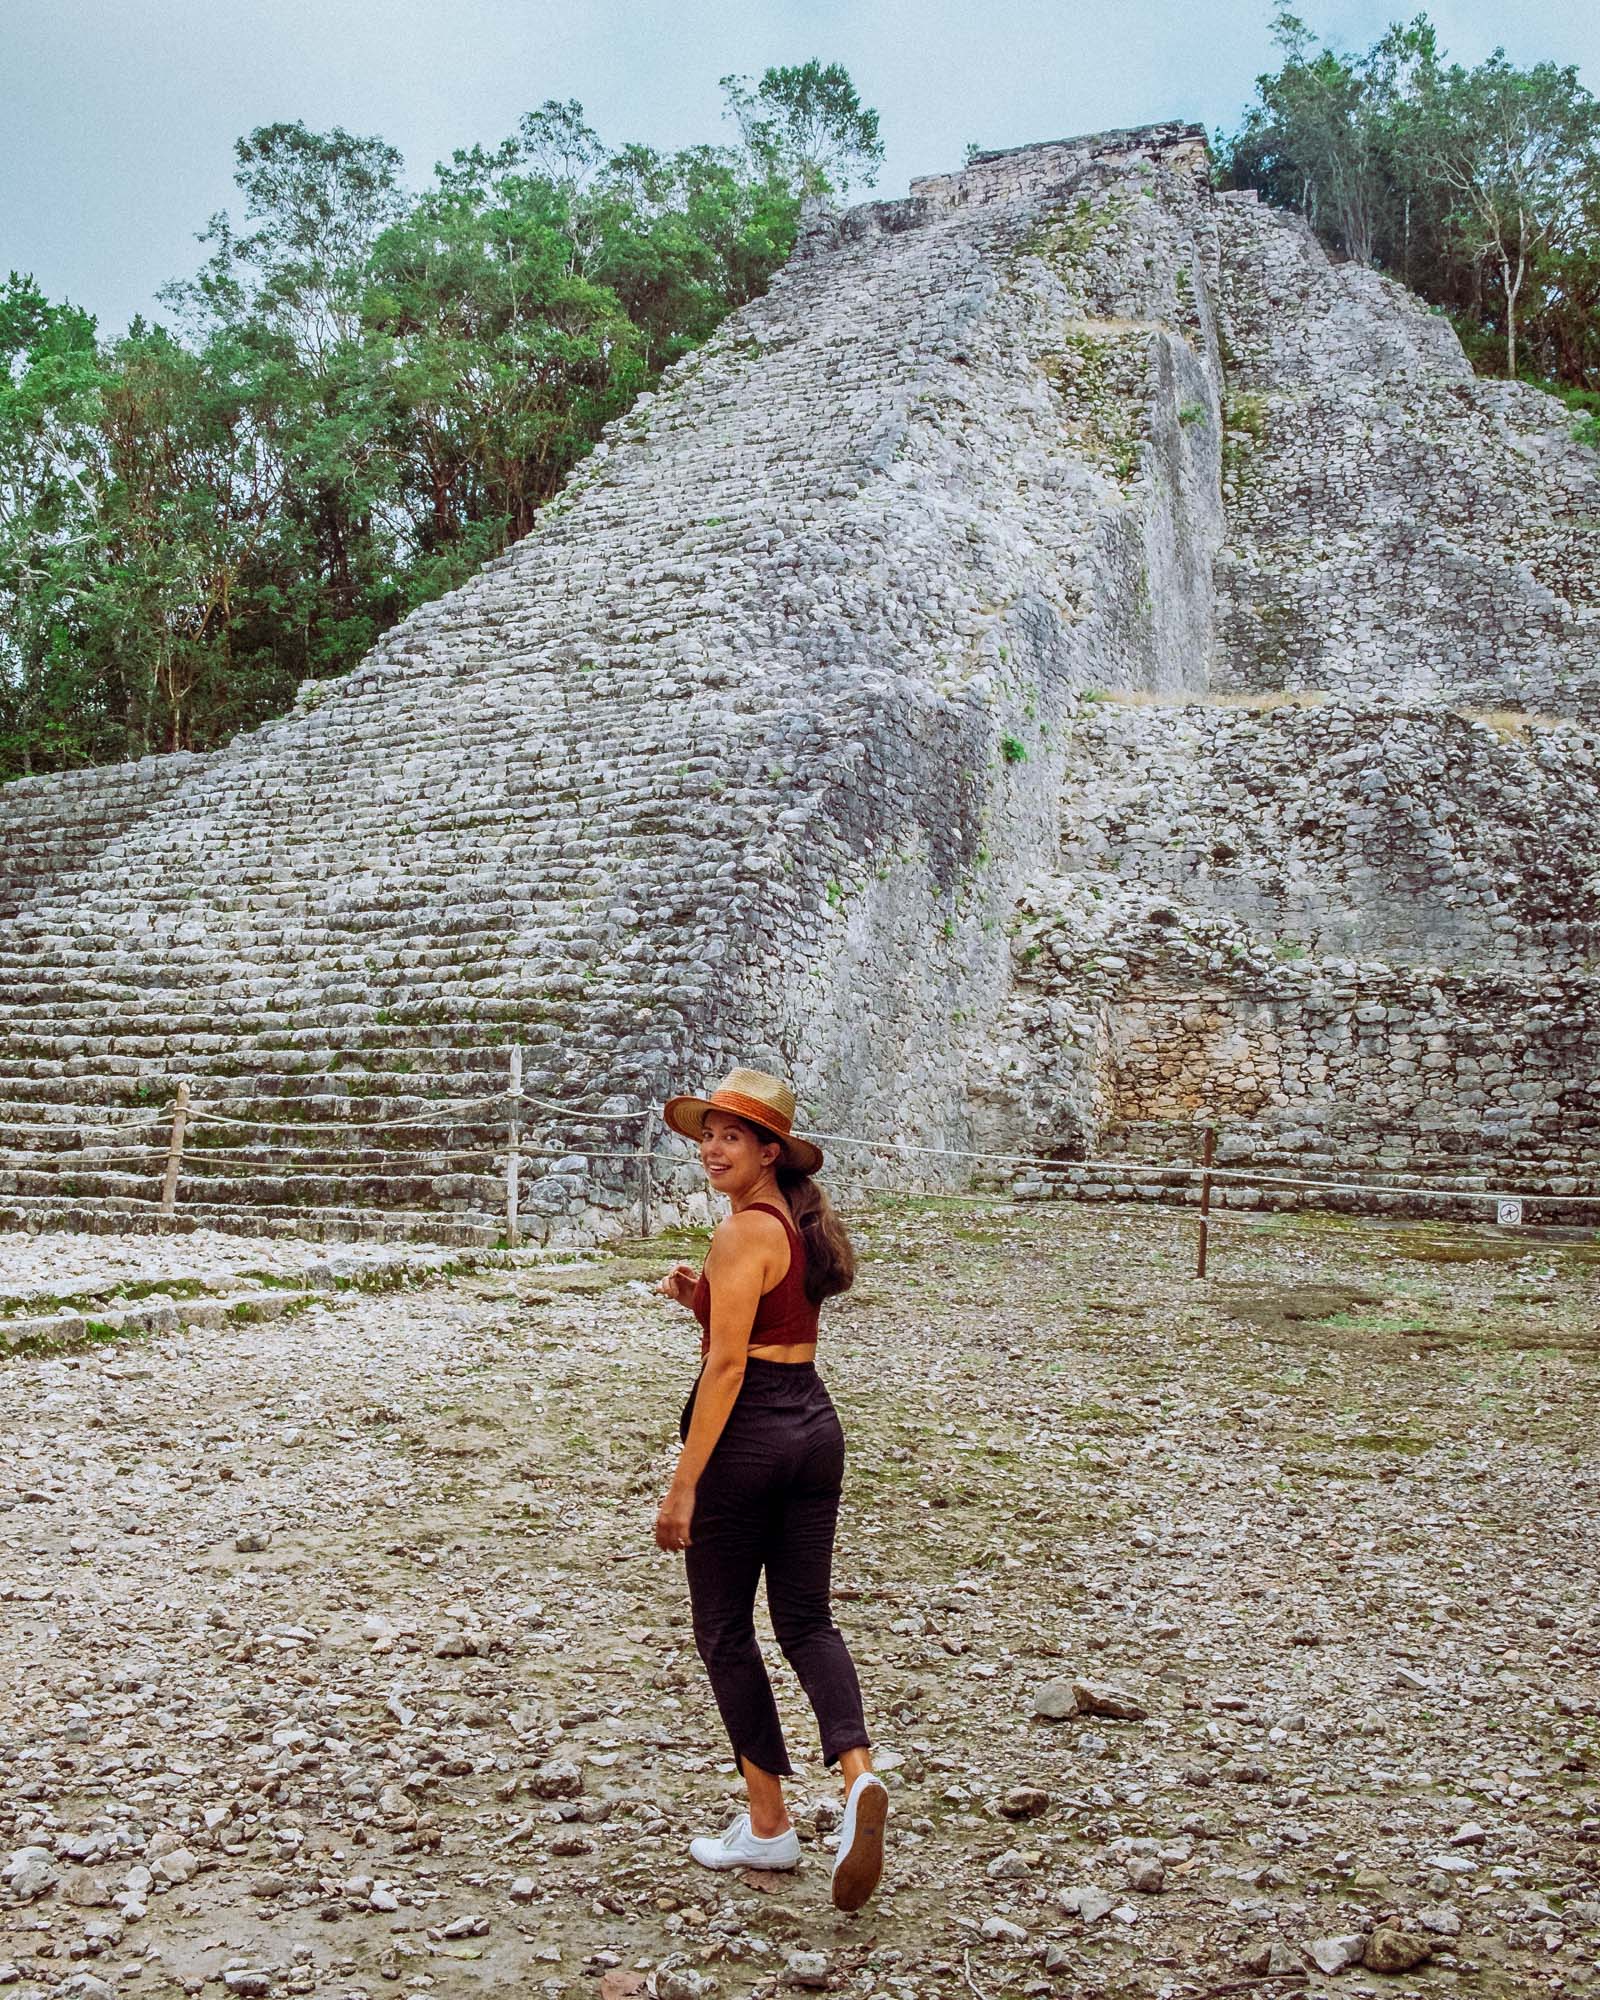 Rachel Off Duty: Woman Posing in front of Coba Ruins, Mexico